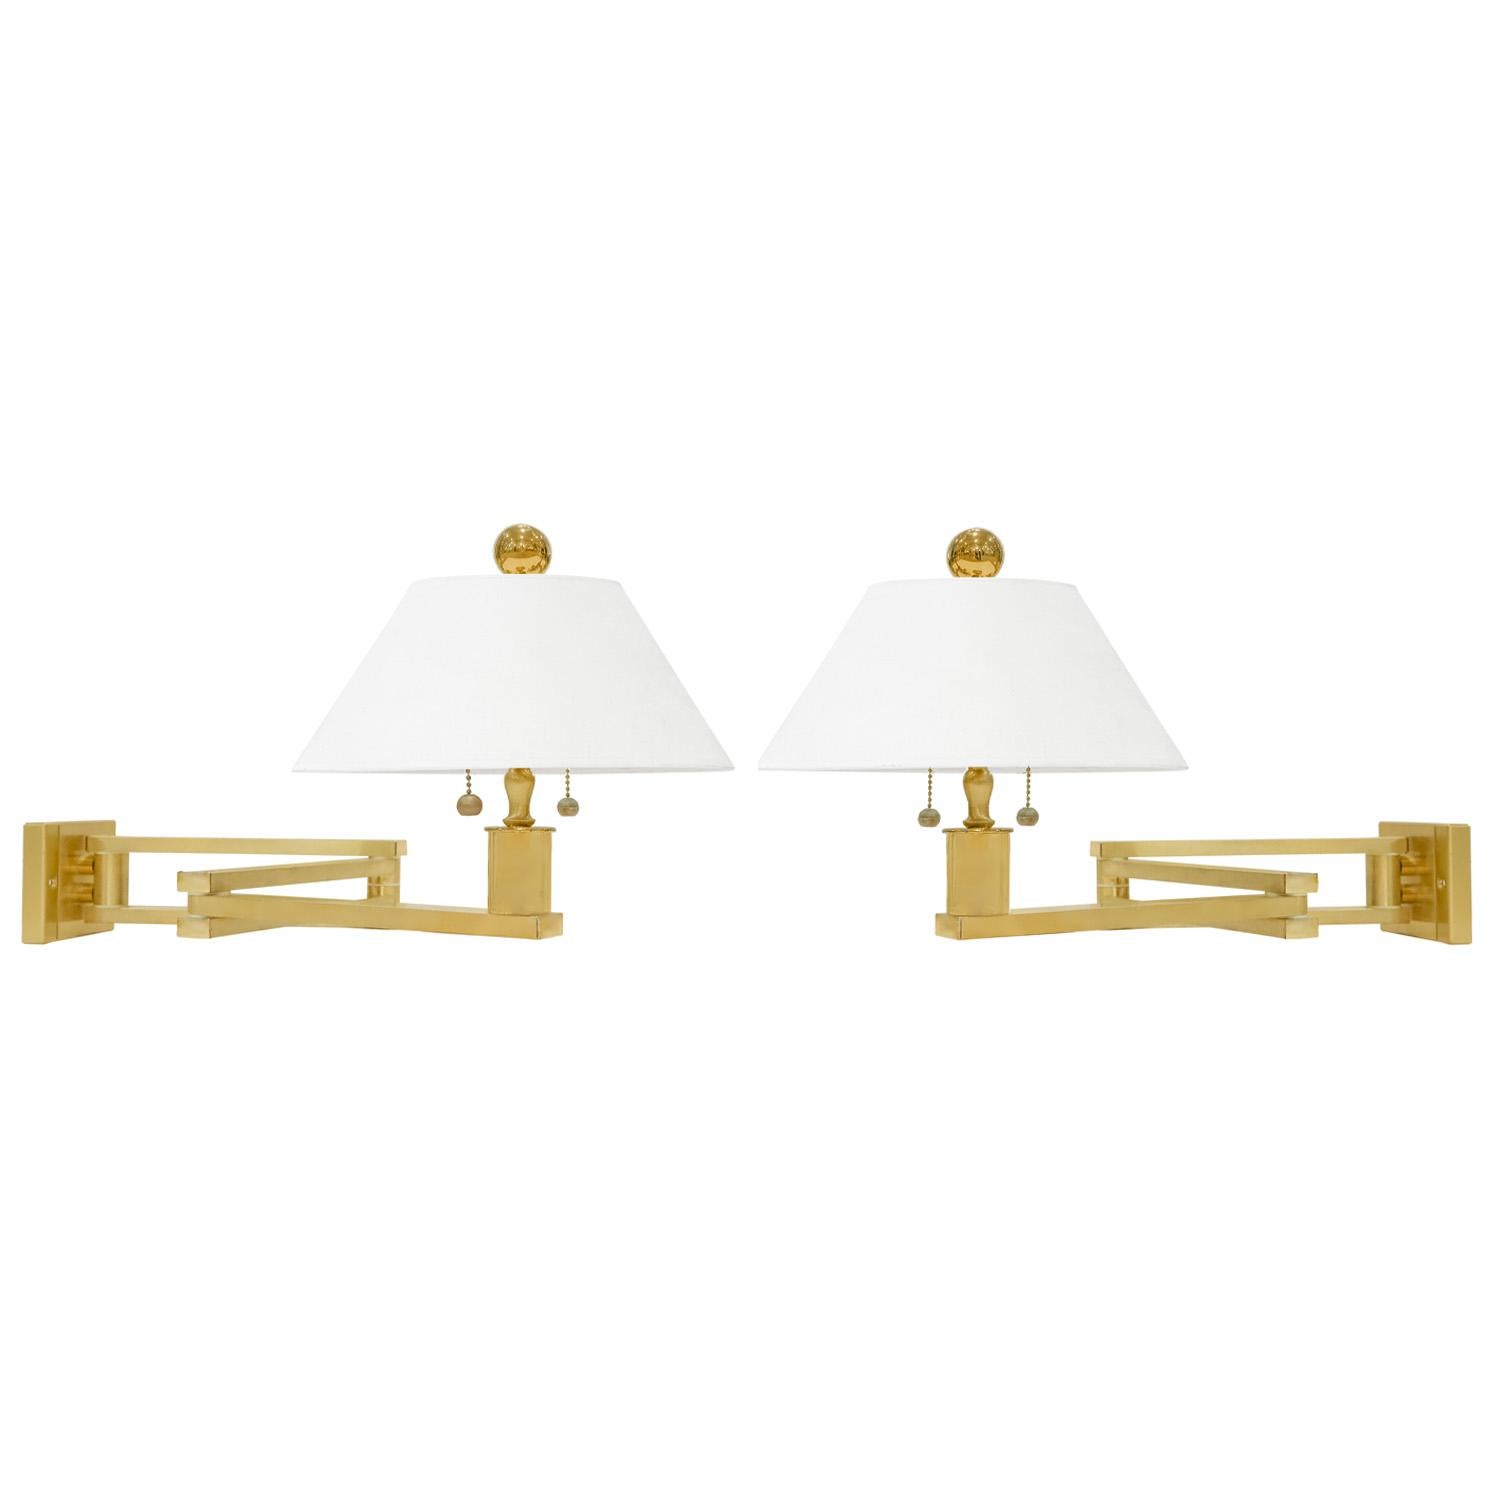 Pair of meticulously crafted swing-arm wall lamps in satin brass, each with 2 bulbs, by Ron Seff, American 1980's. Ron Seff worked for Karl Springer for years before going off on his own.  Each comes with a back mounting plate.  The craftsmanship on